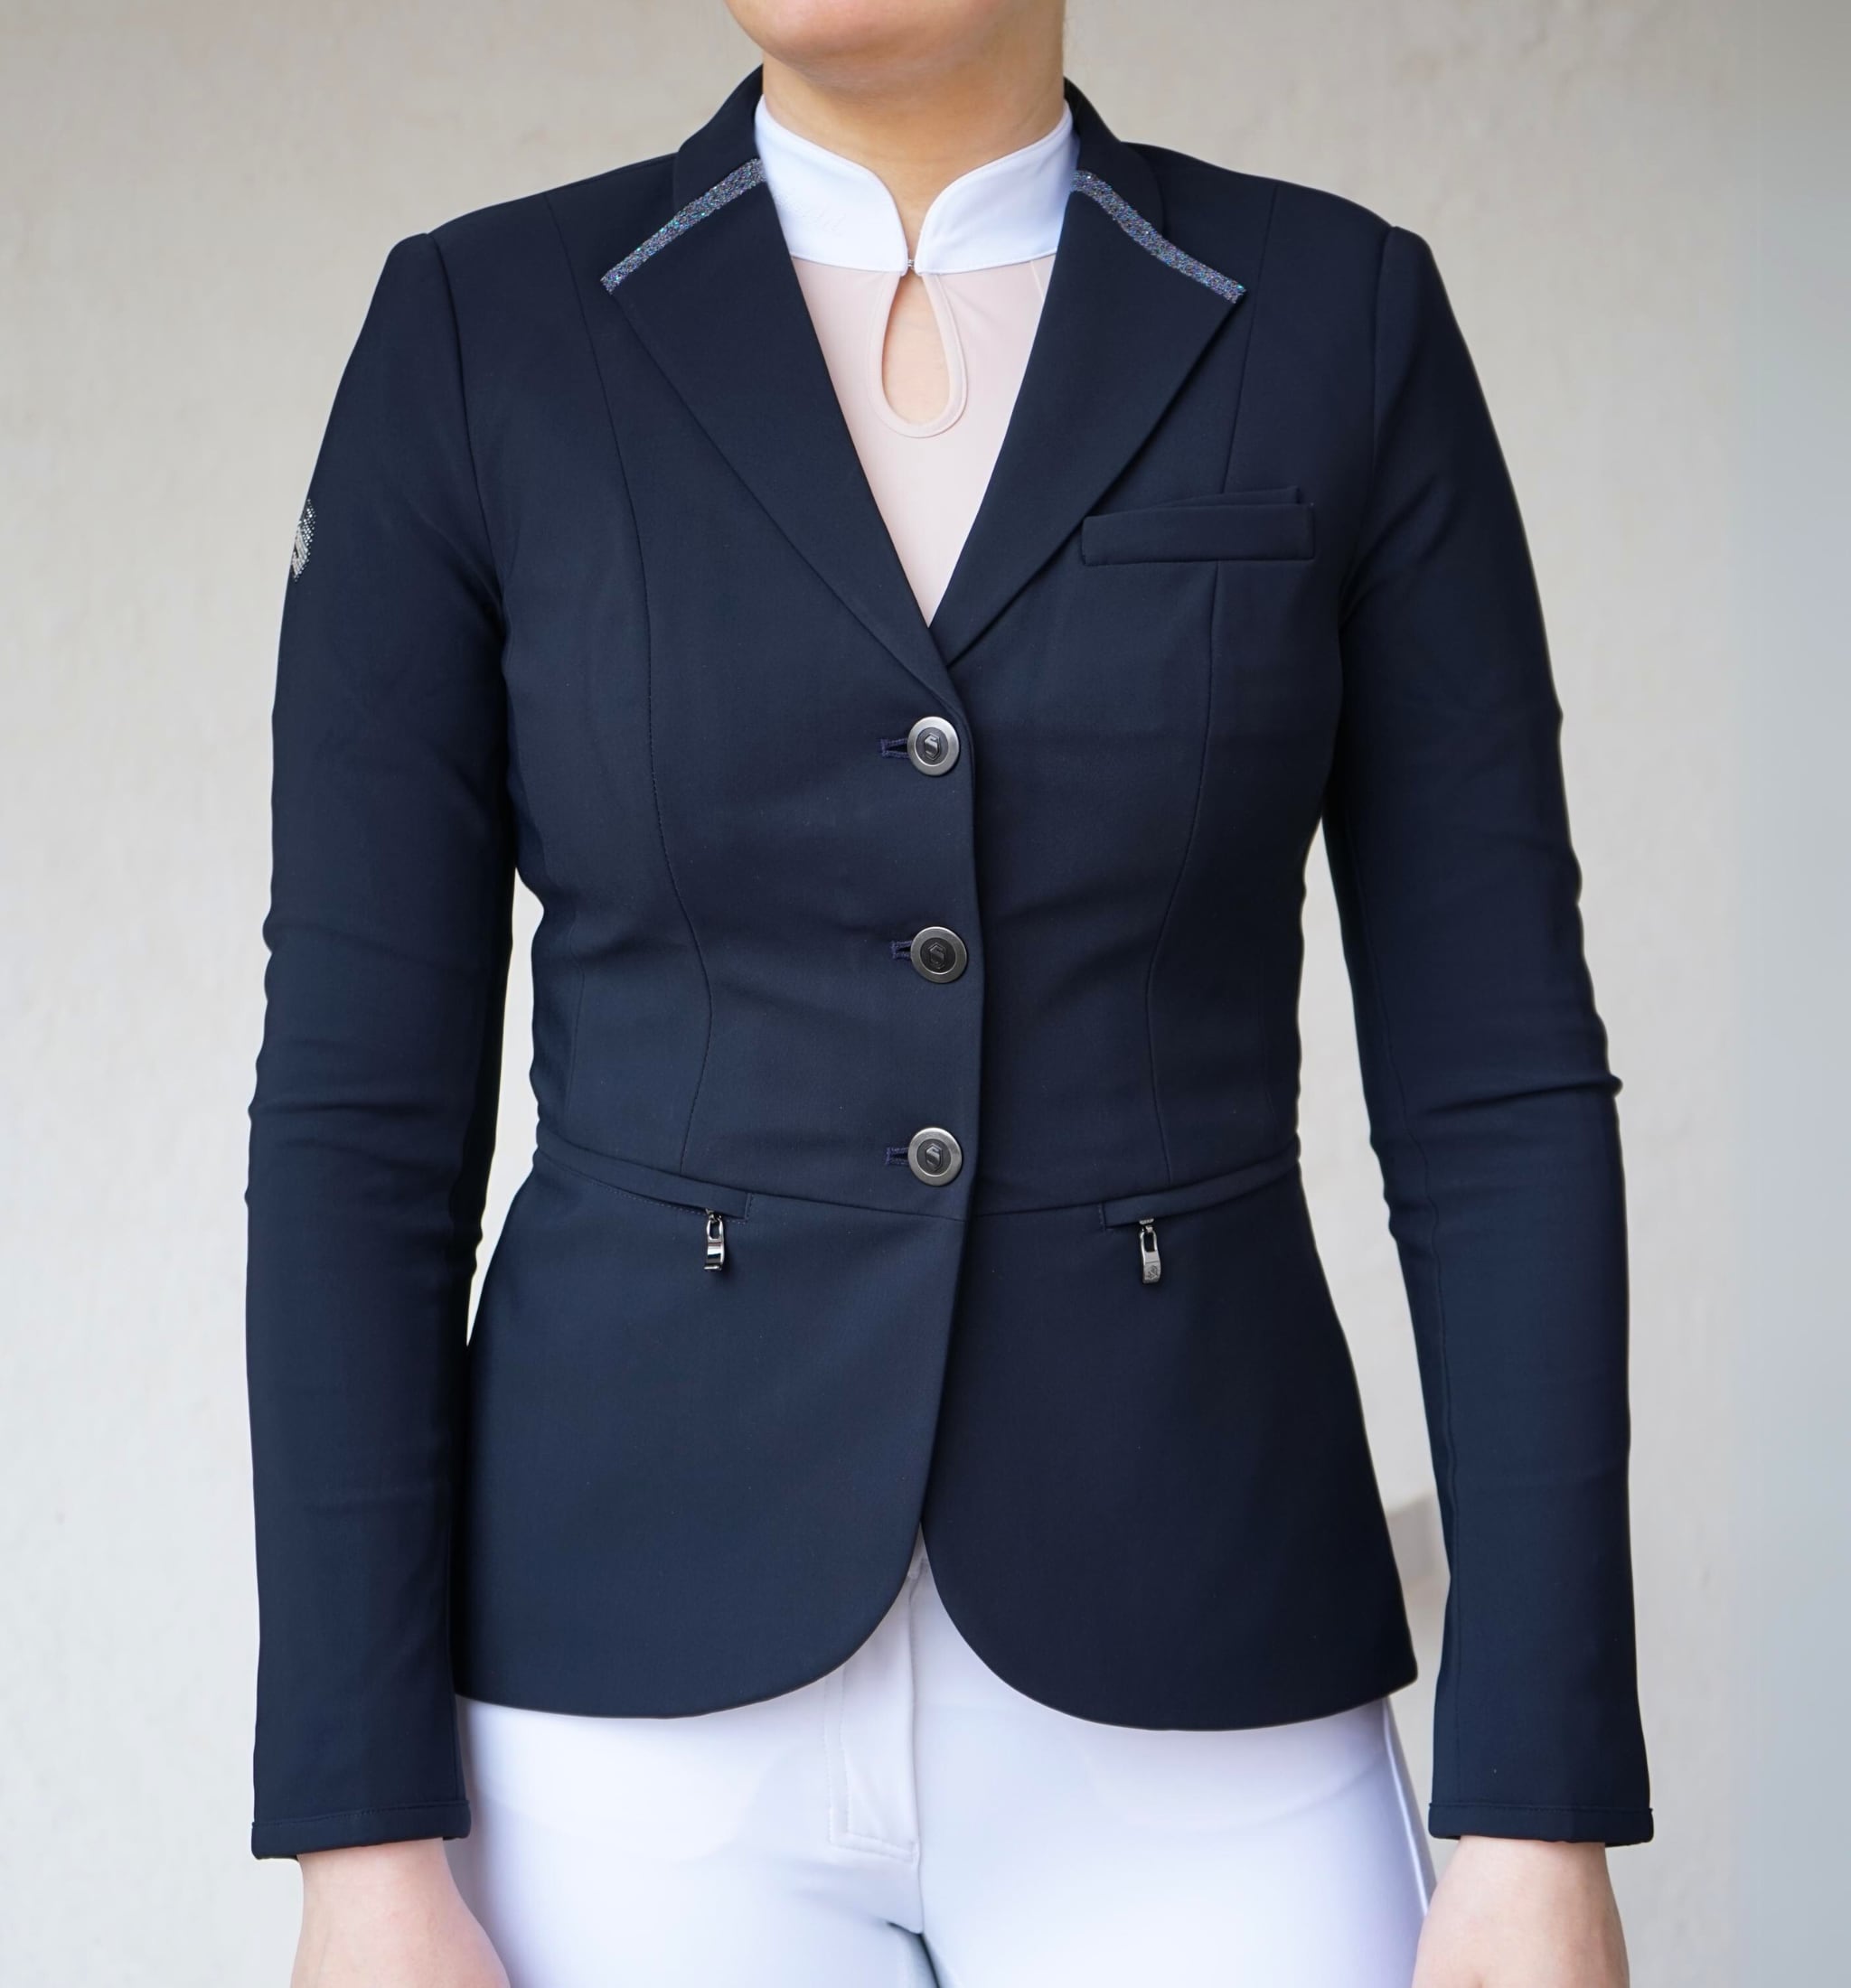 Victorine Crystal Fabric P24 Competition Jacket - Navy